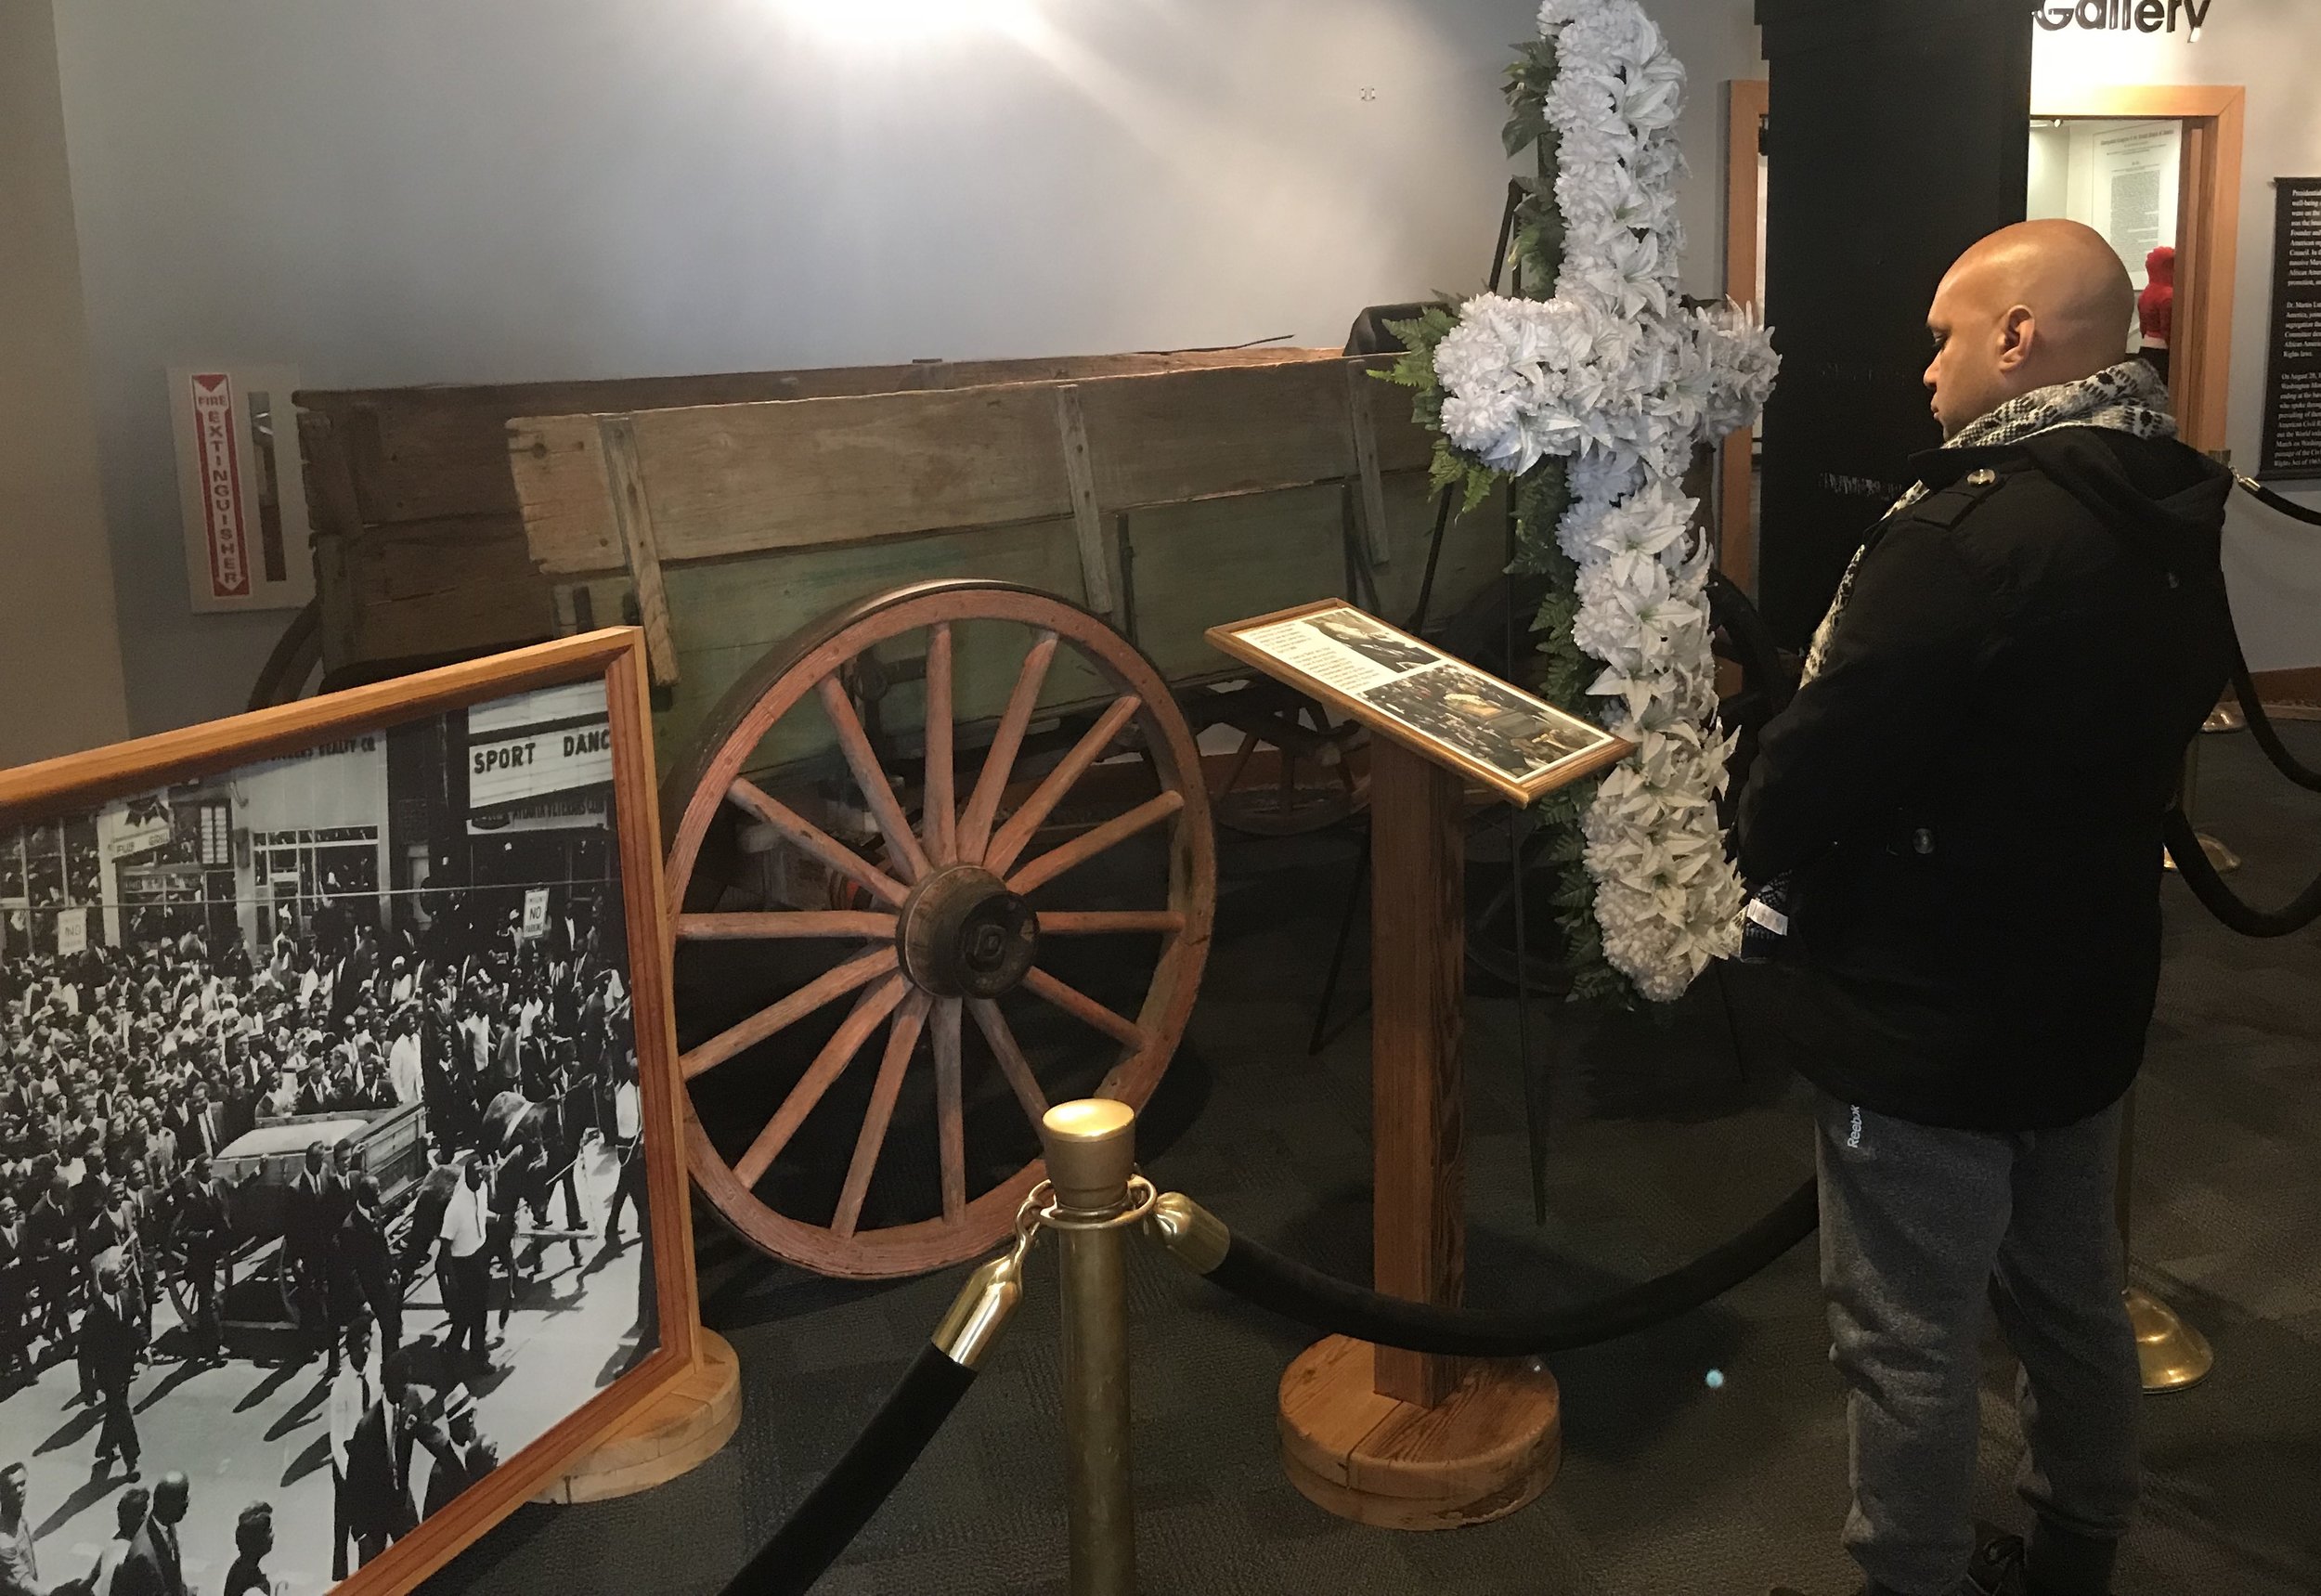  The wagon that carried Martin Luther King’s casket is on display at the Martin Luther King Jr. National Historical Park in Atlanta.      